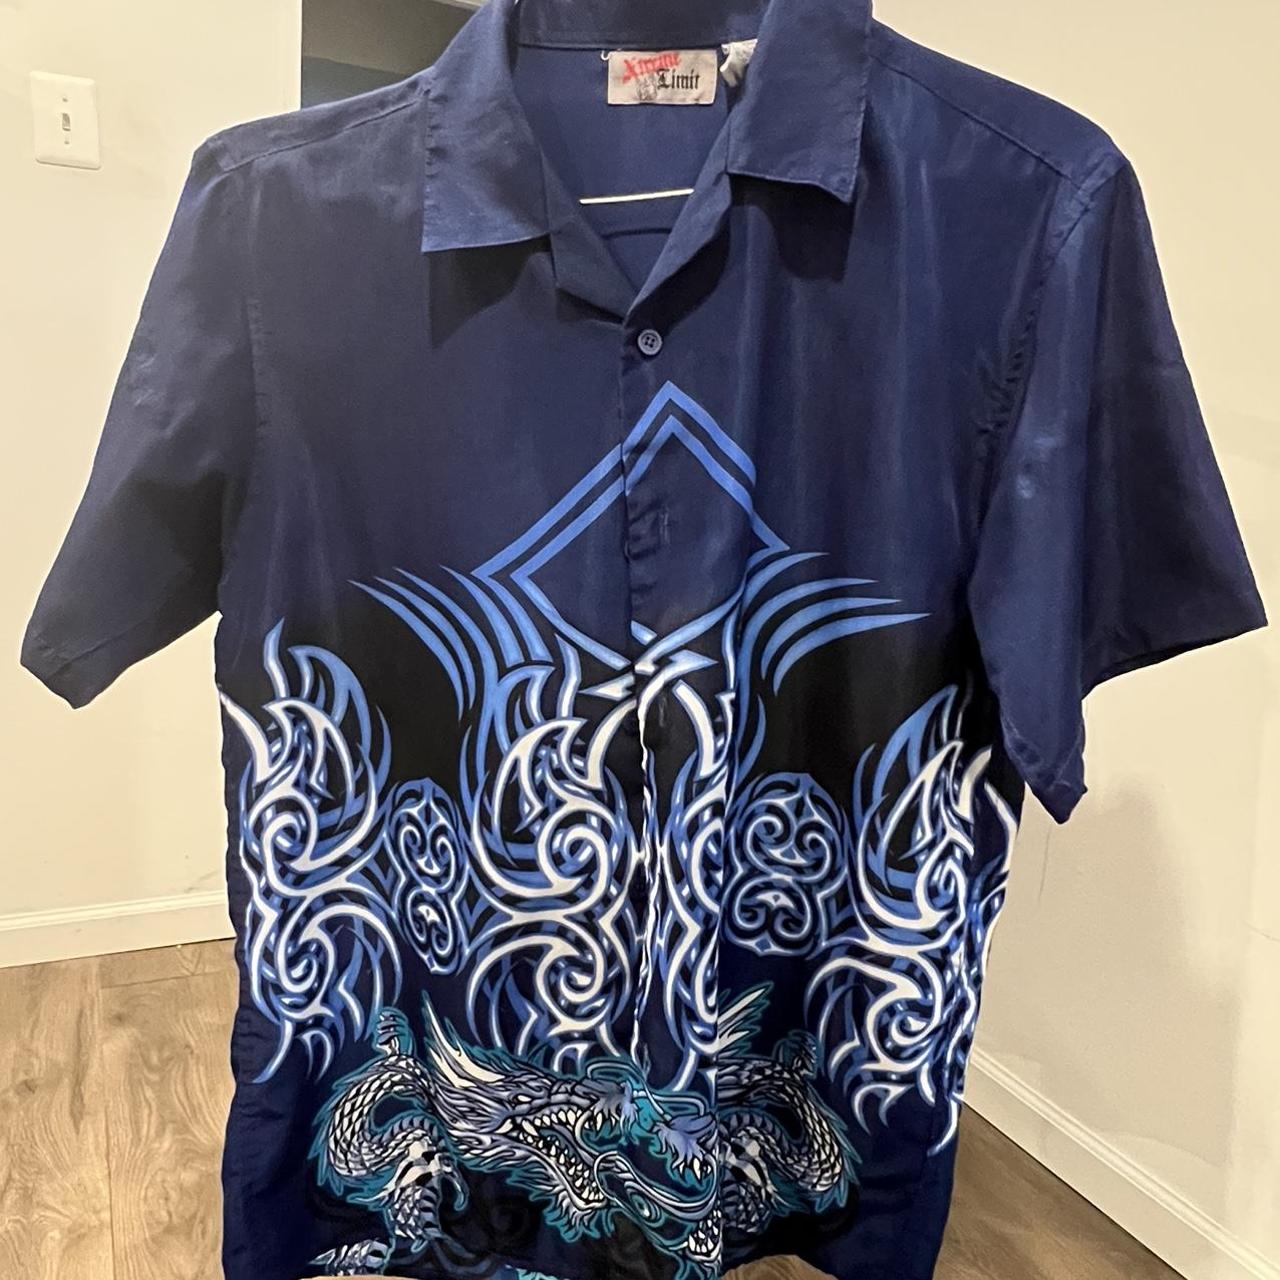 Extreme Fit Men's Blue and Black Shirt